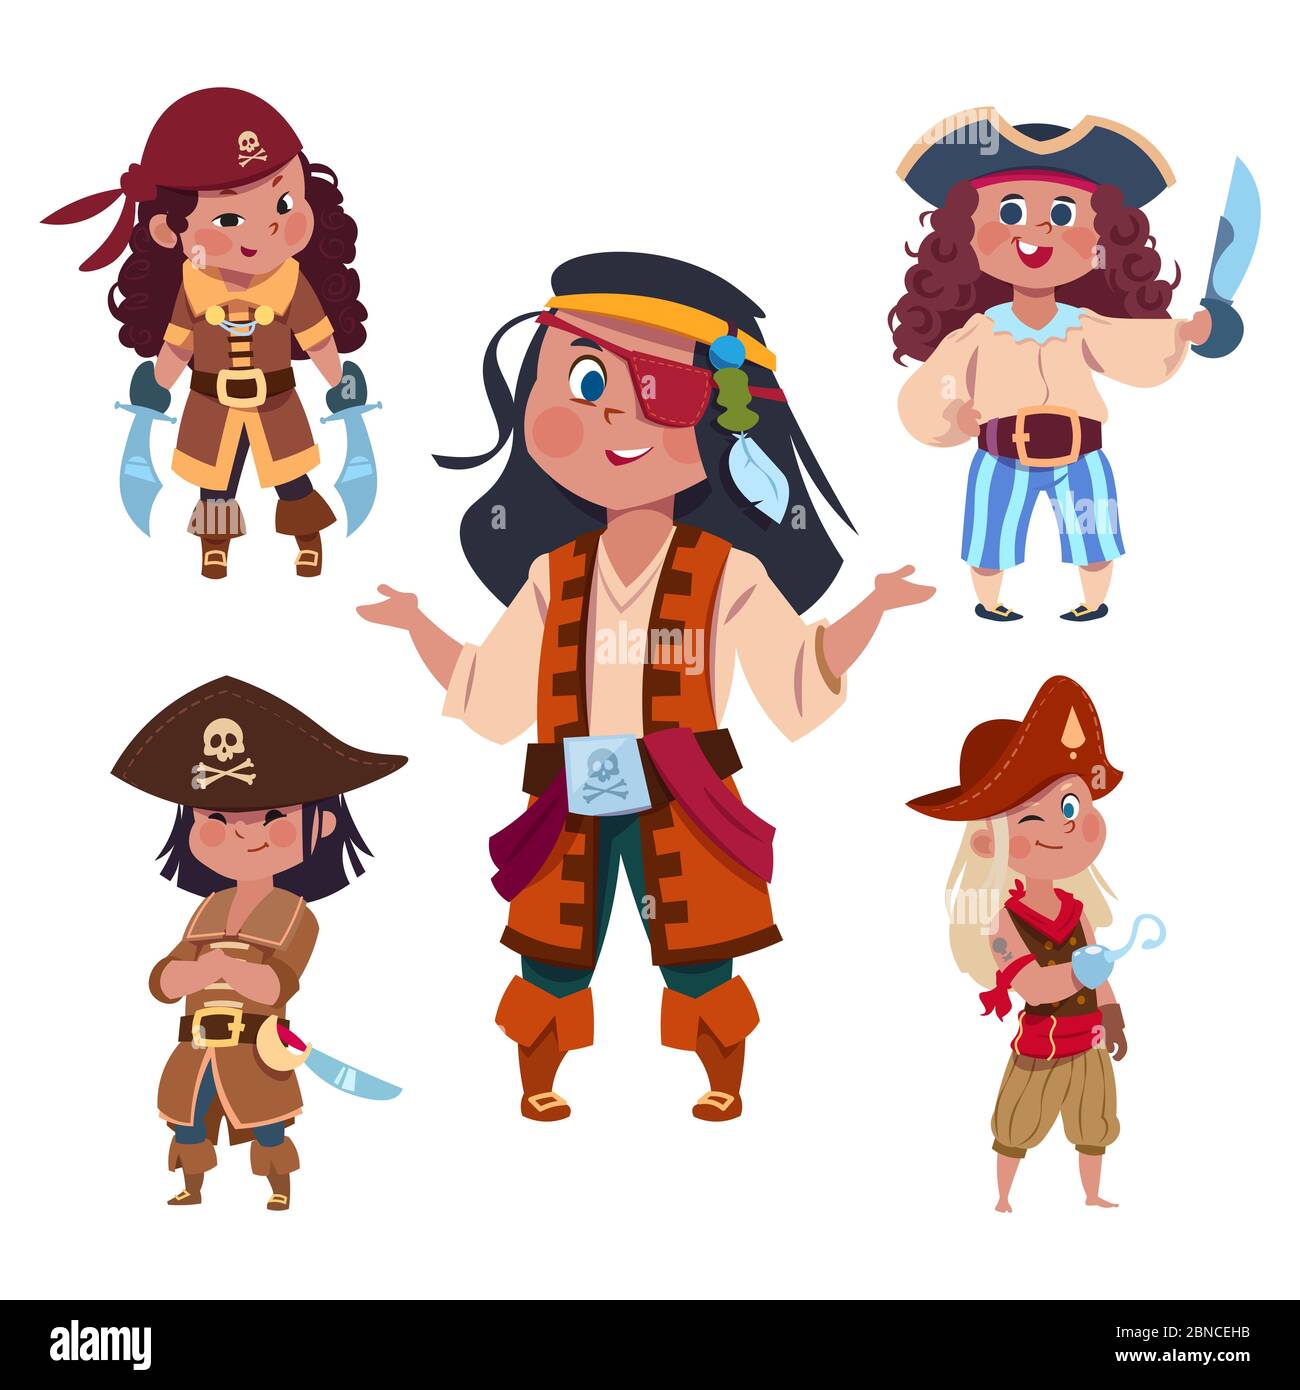 Cartoon character girl pirates isolated on white background. Illustration of pirate character with hook and sabre, pirating costume carnival Stock Vector